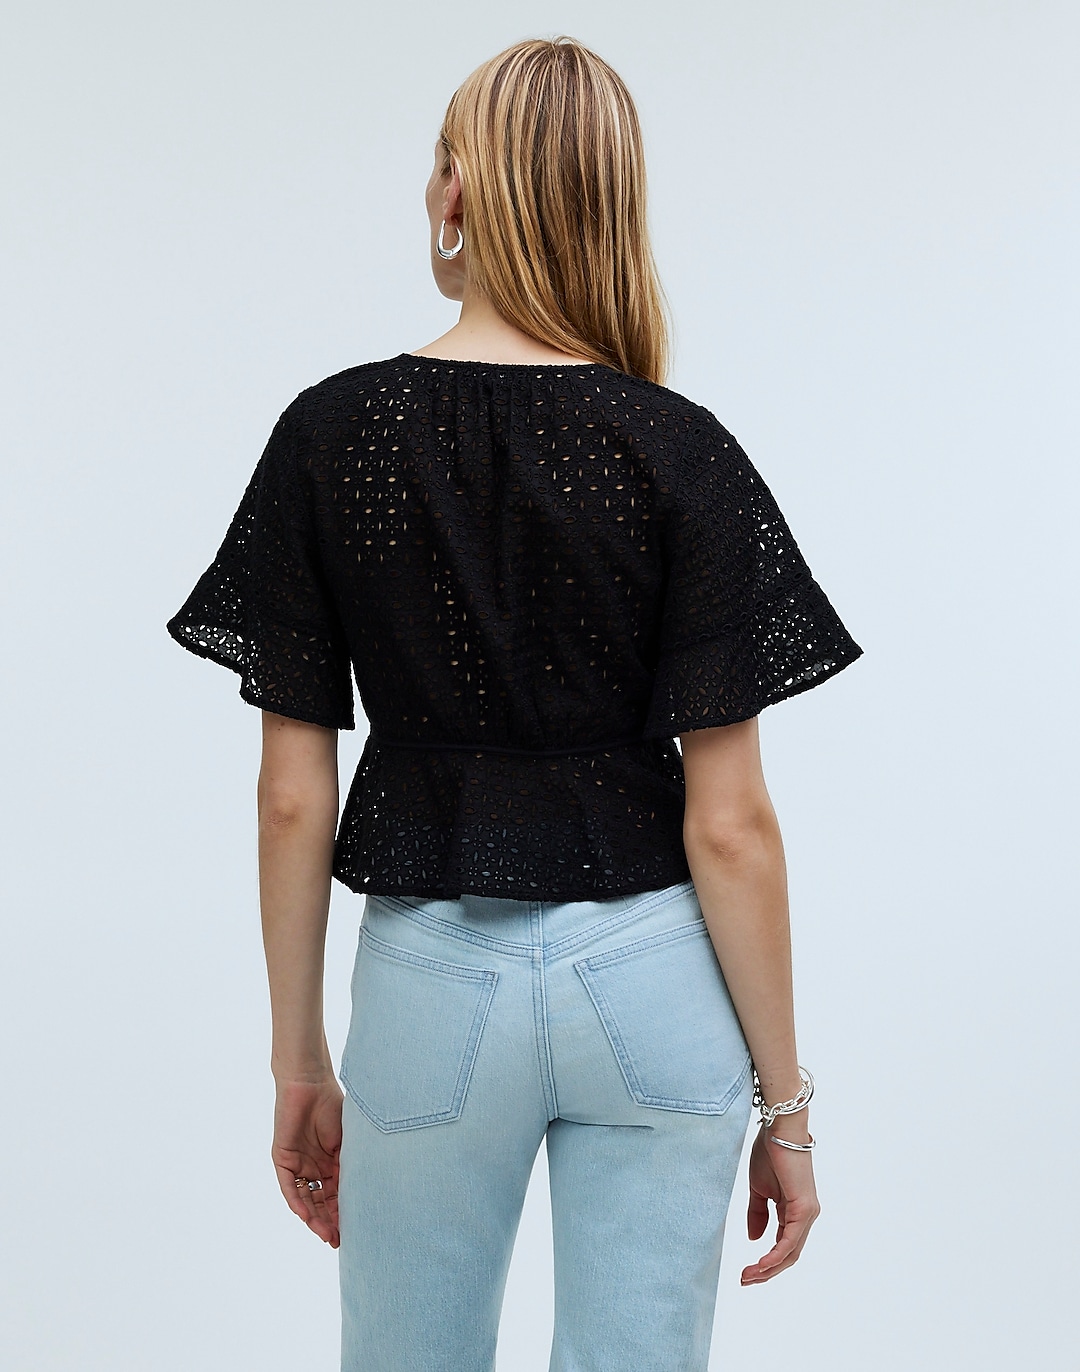 Tie-Front Top in Eyelet | Madewell